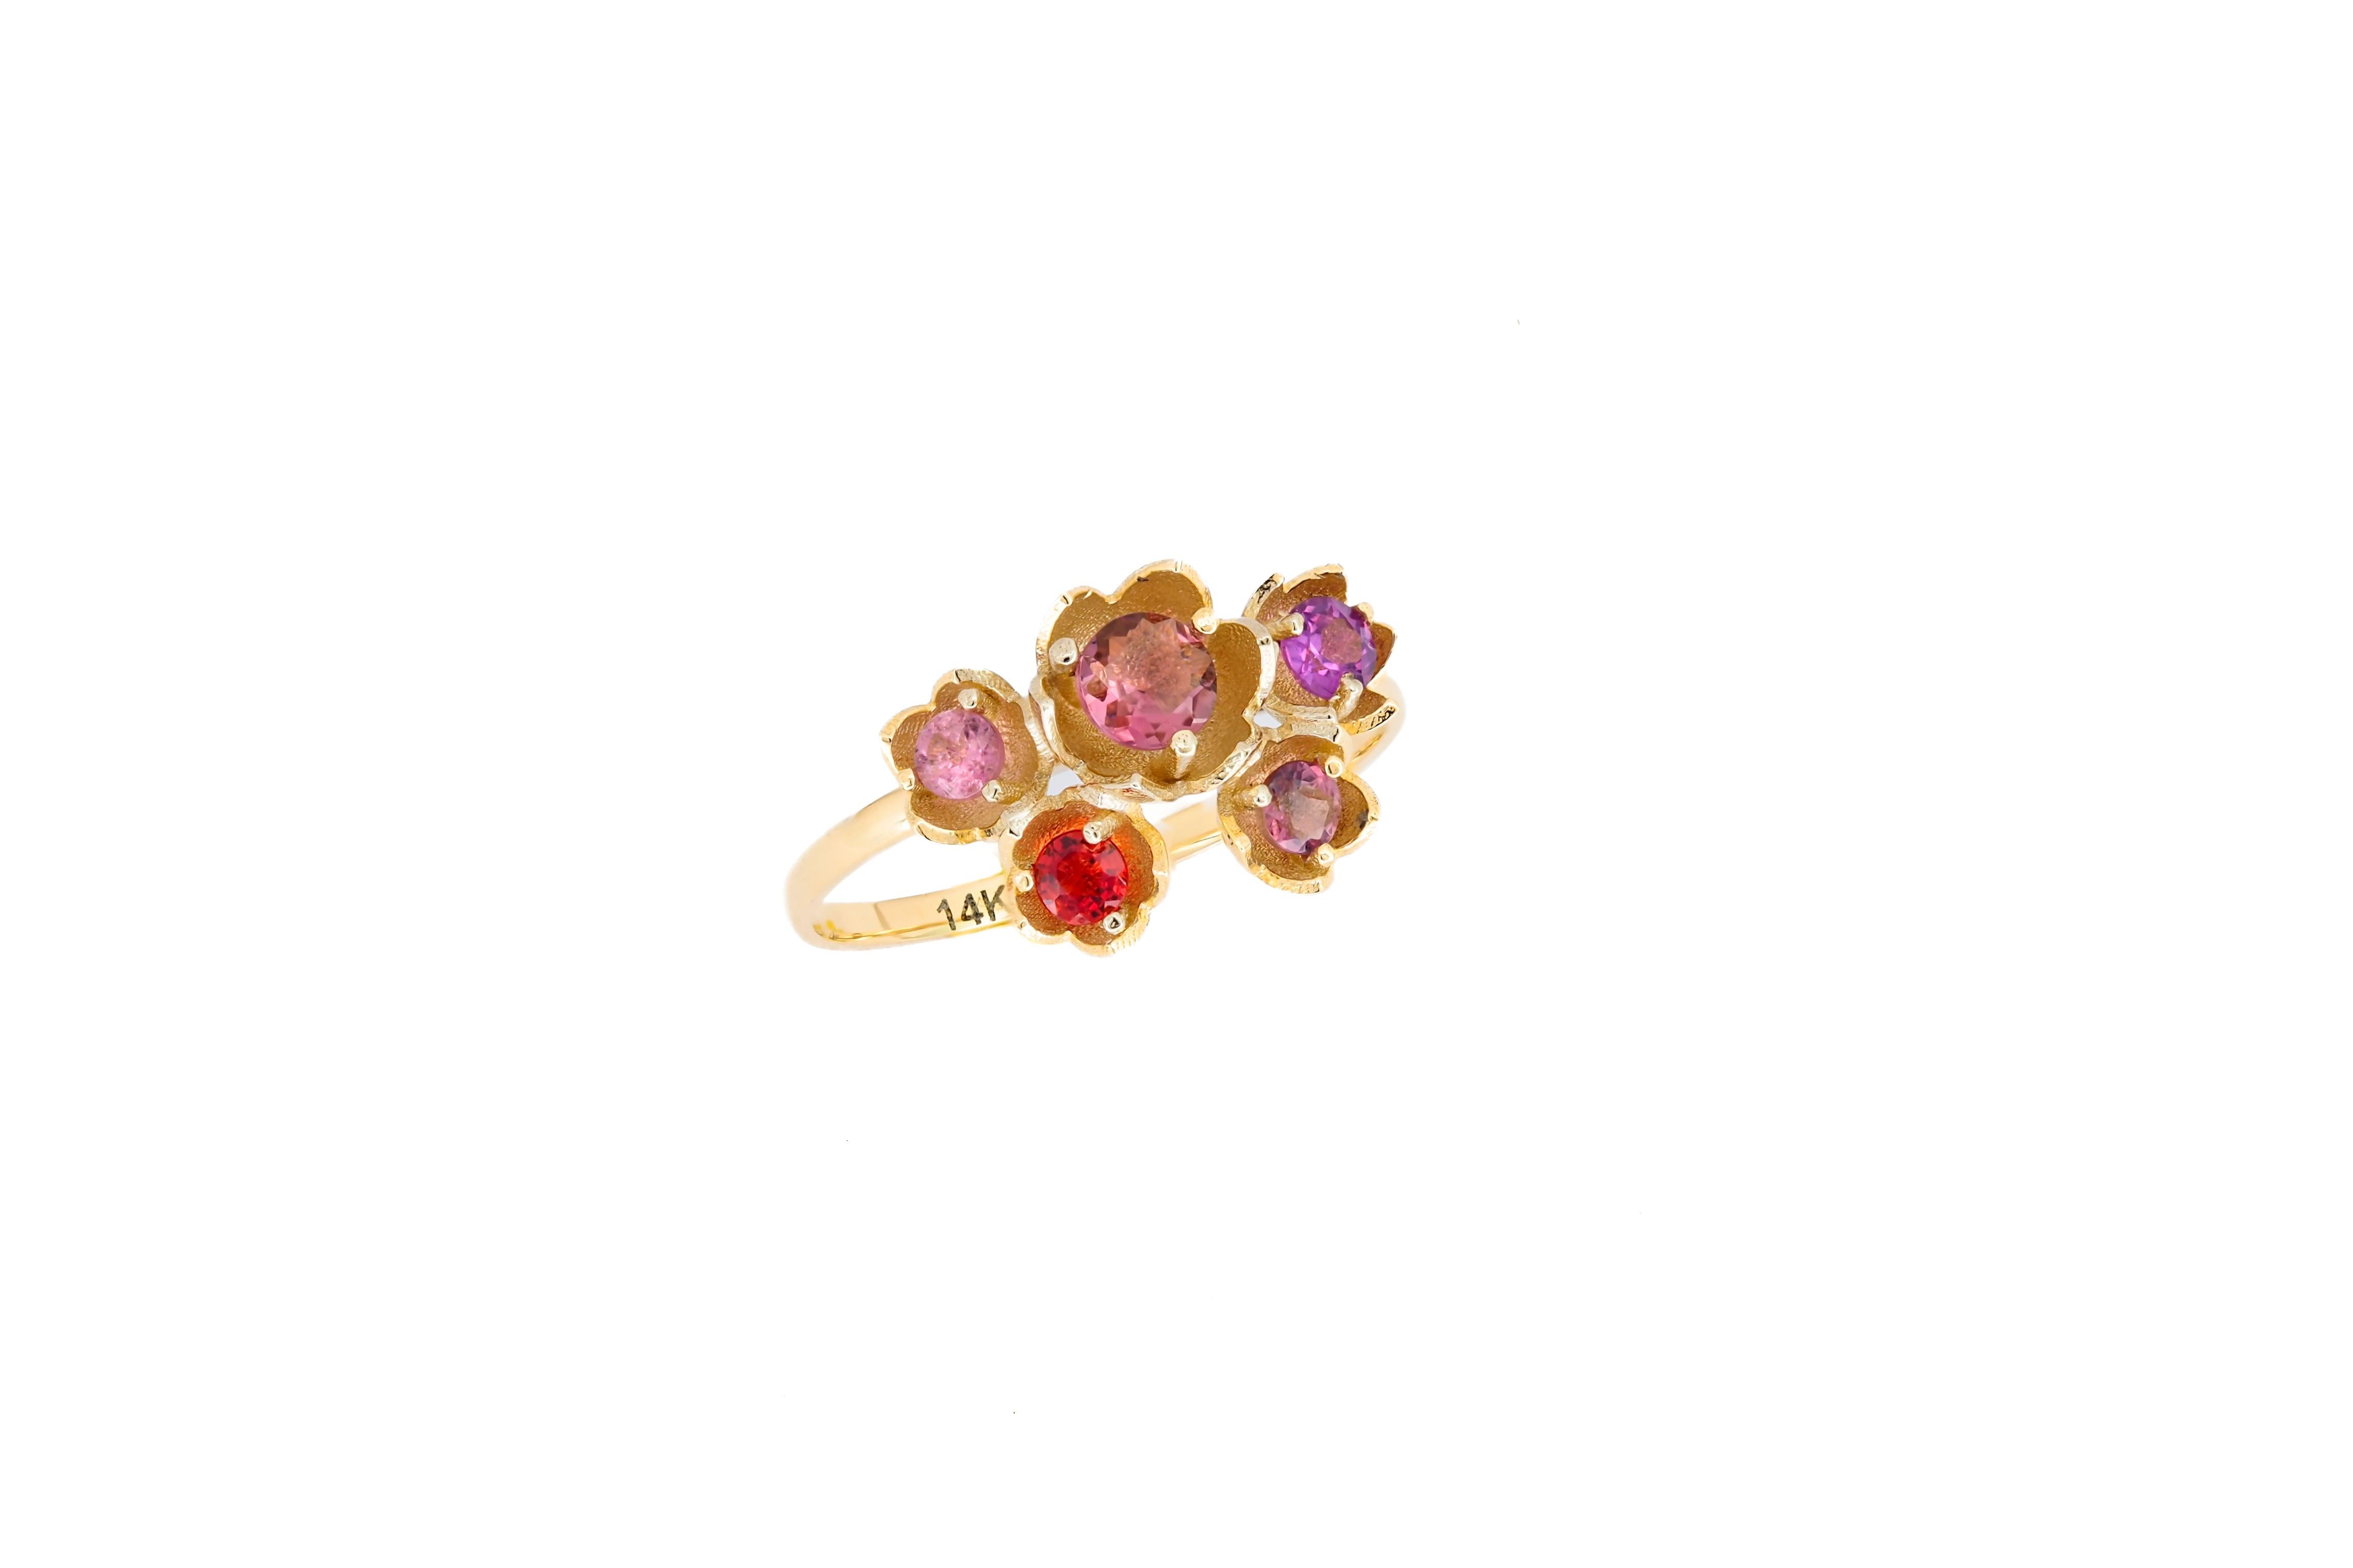 For Sale:  14 karat gold Blossom ring with multicolored gemstones. Pink Tourmaline ring 7